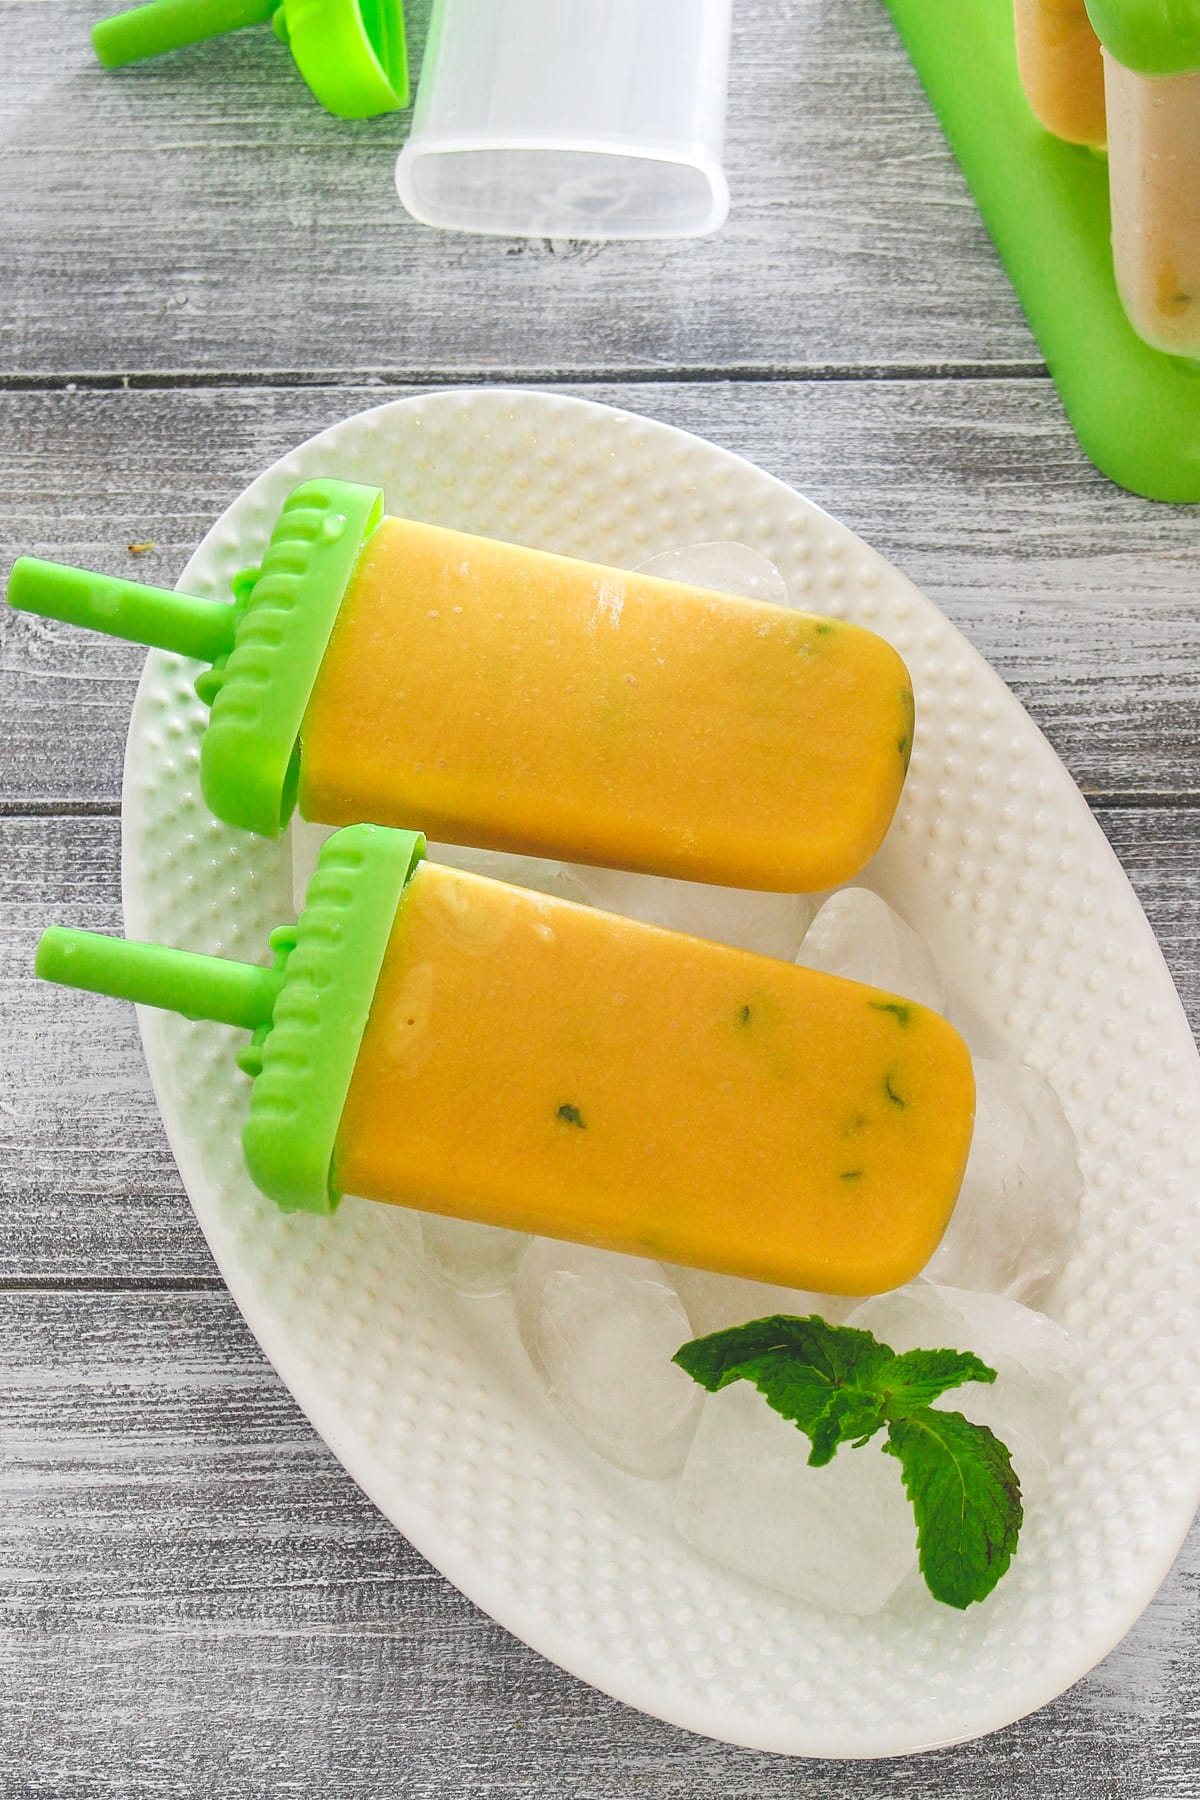 2 mango popsicles in tray of ice cubes.